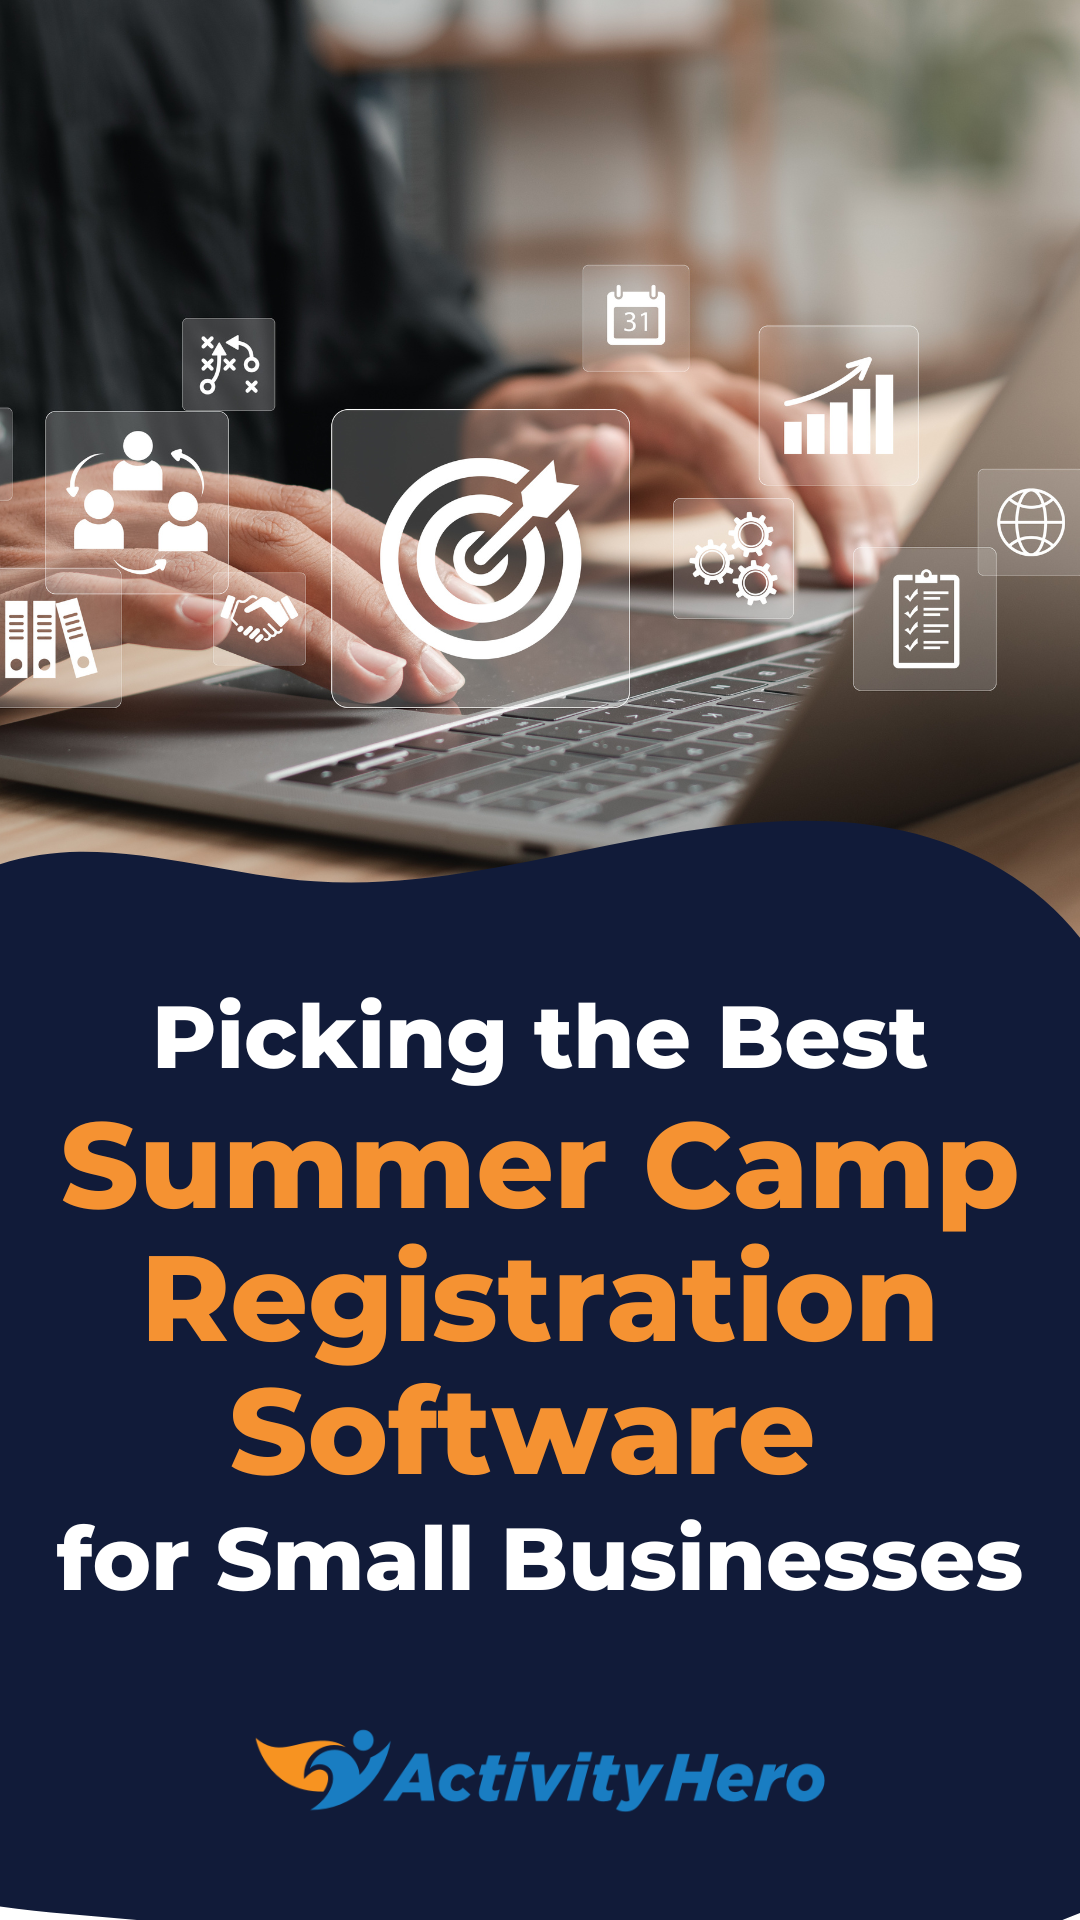 Camp Registration Software for Small Businesses